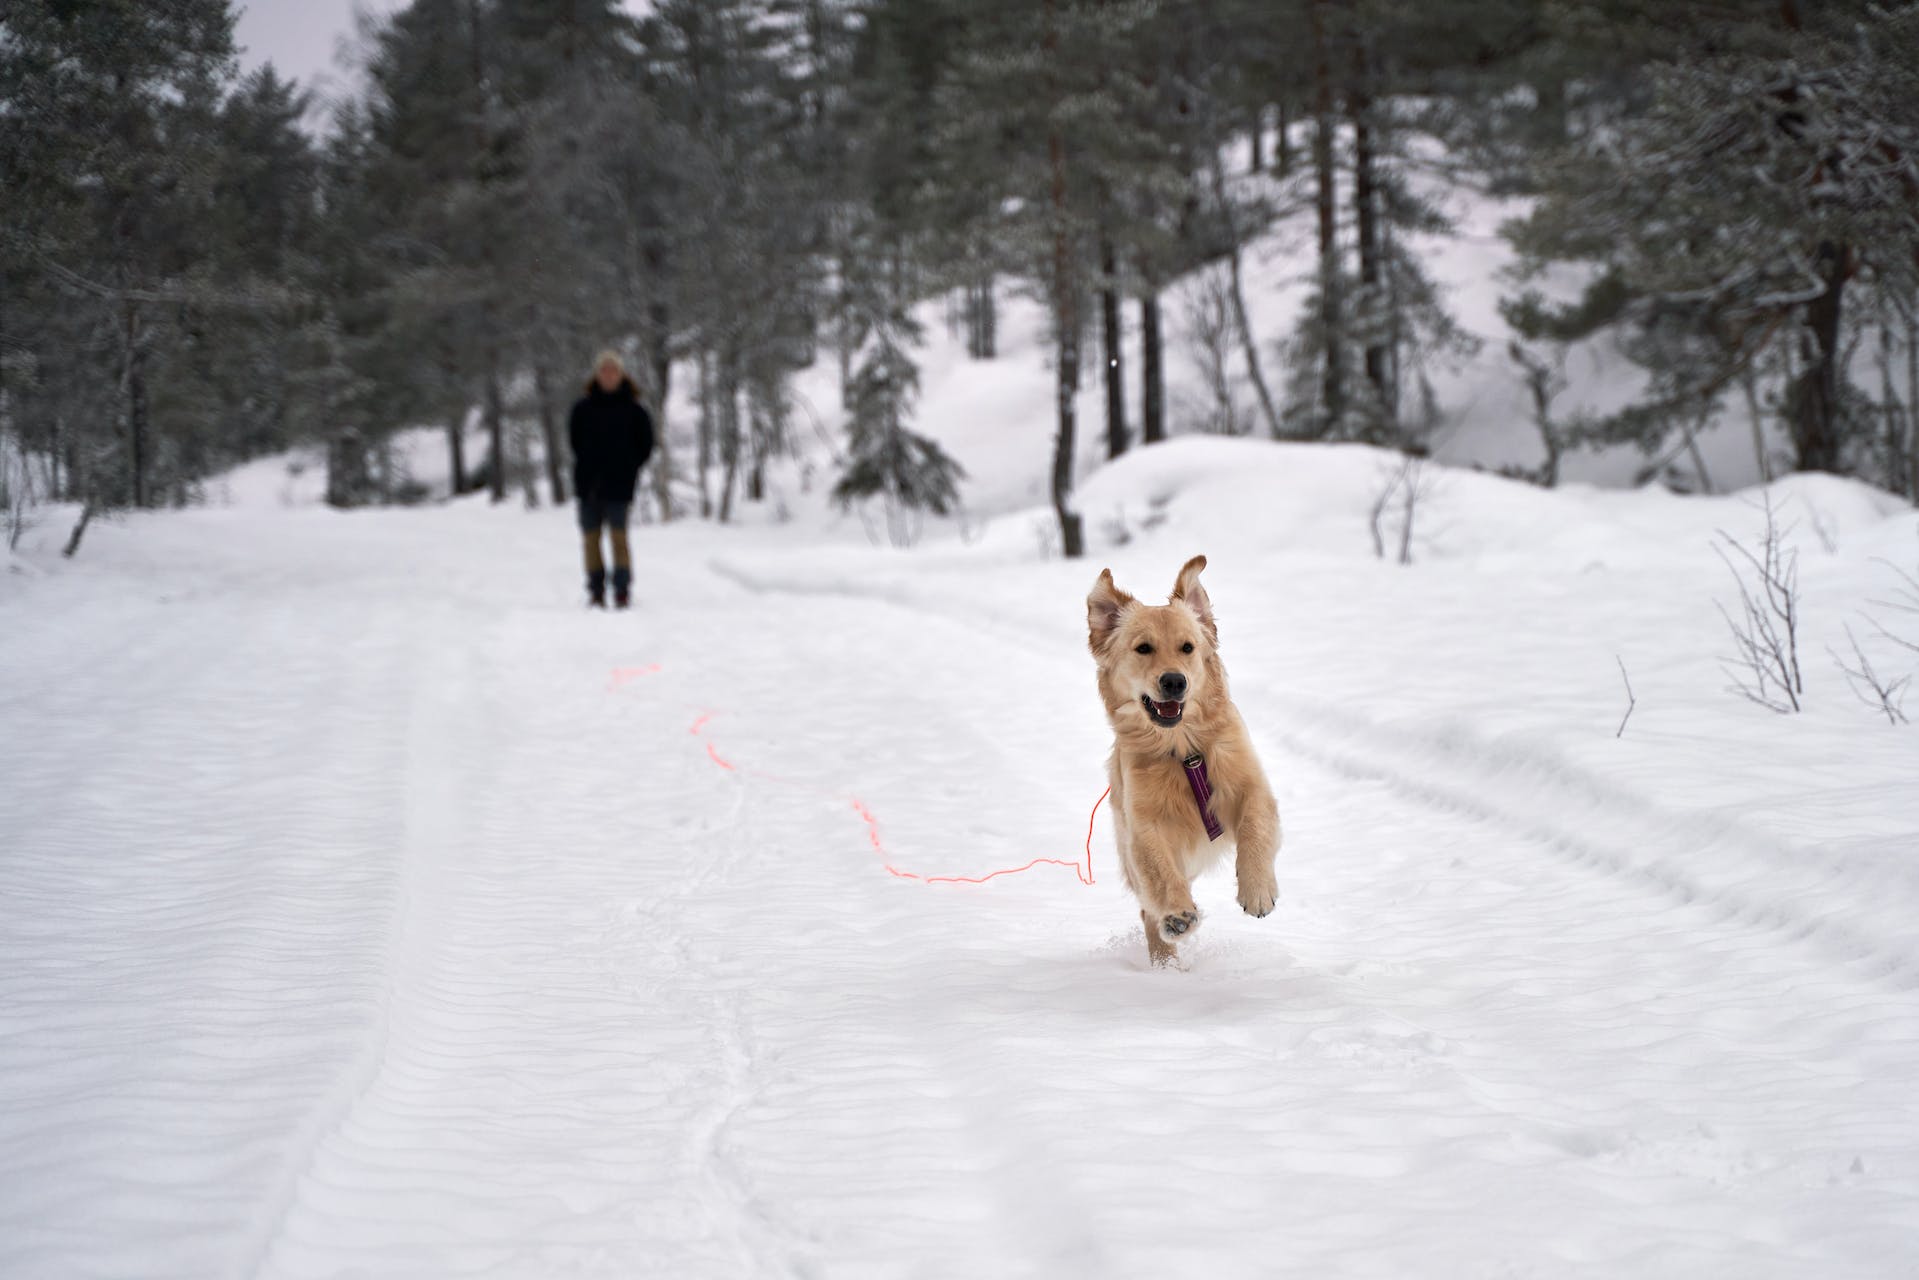 A dog running away into a snowy forest